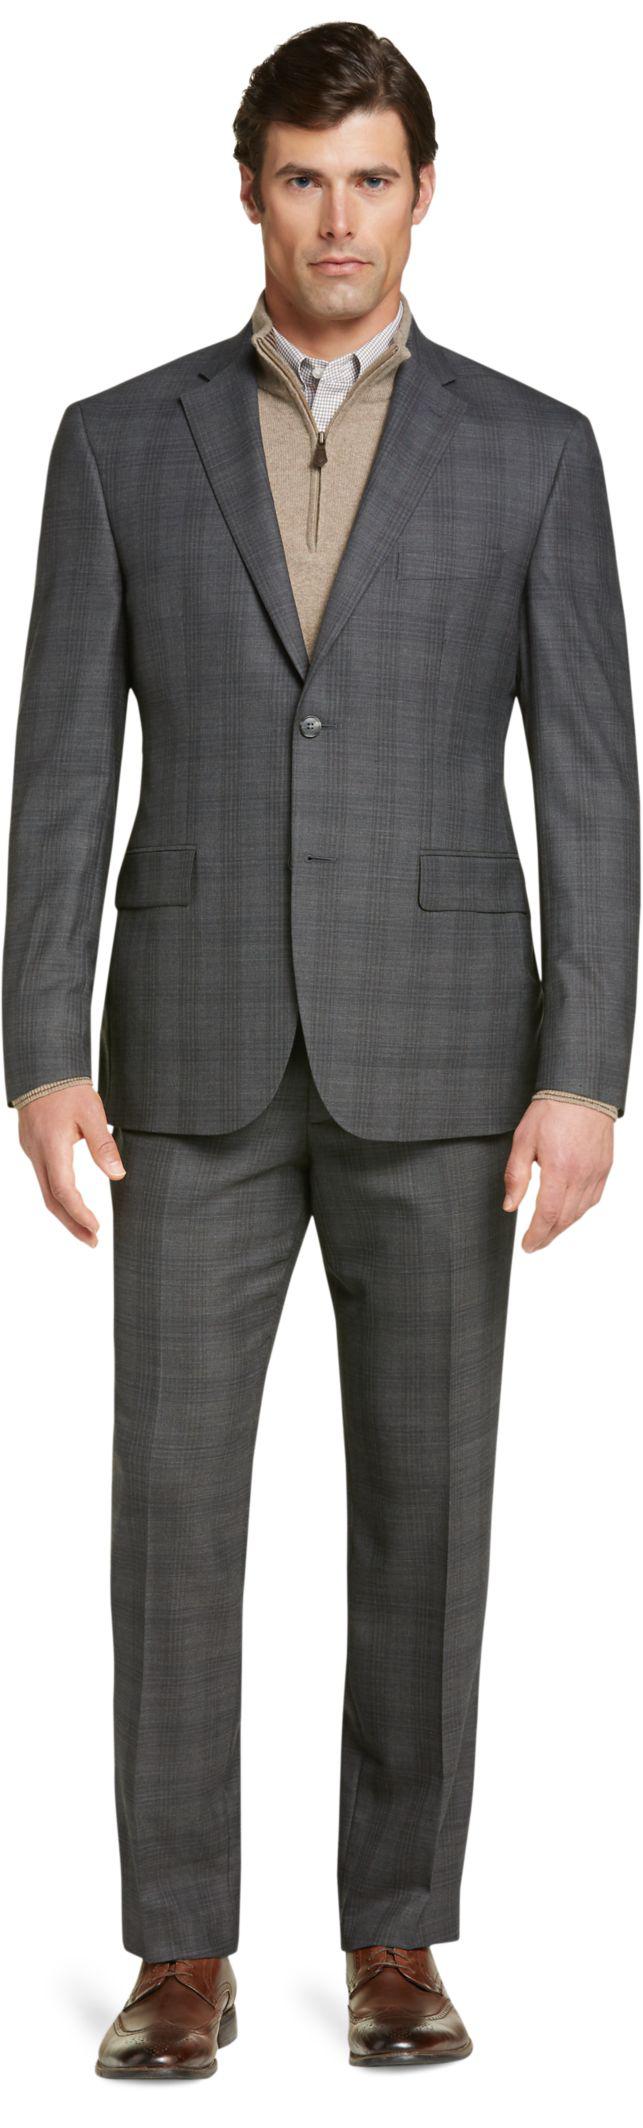 Lyst - Jos. a. bank Traveler Collection Tailored Fit Plaid ...